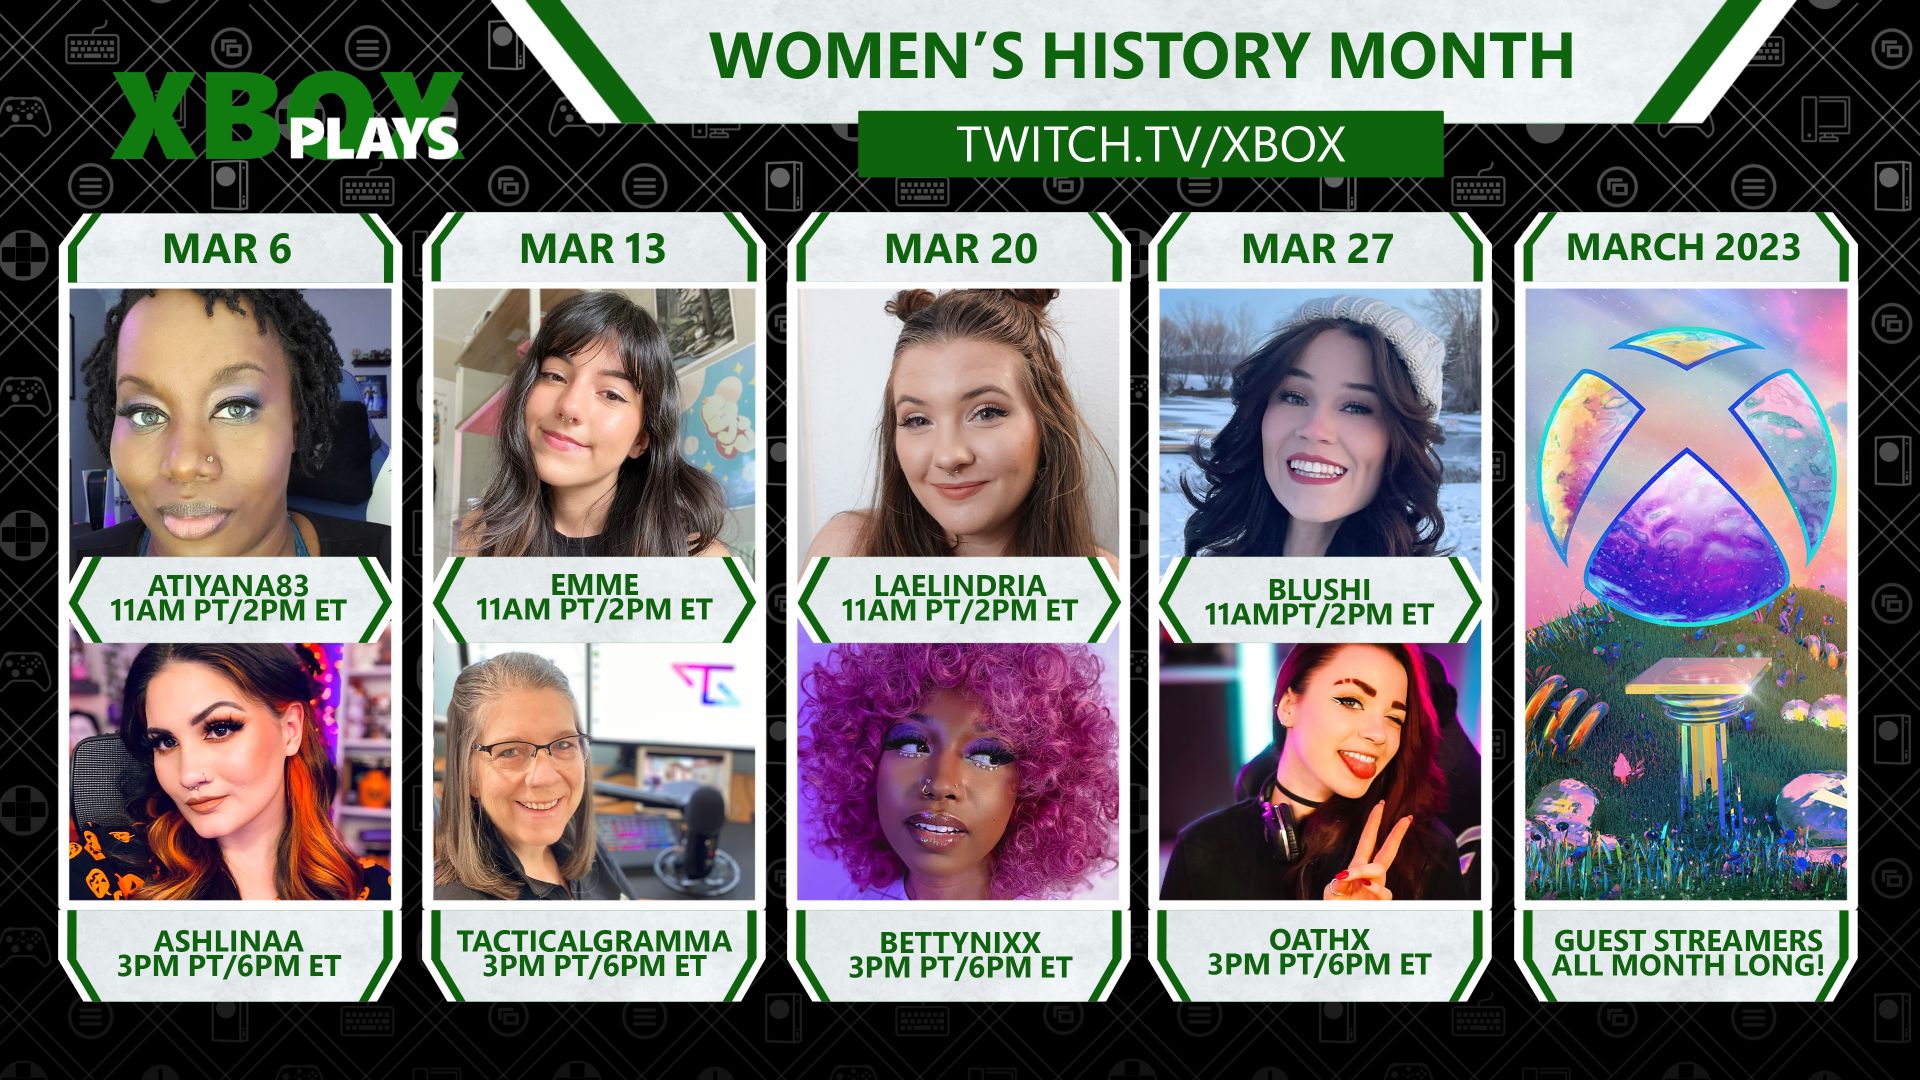 A compilation image featuring eight women gamers on Xbox Plays for Women’s History Month at twitch.tv/xbox.